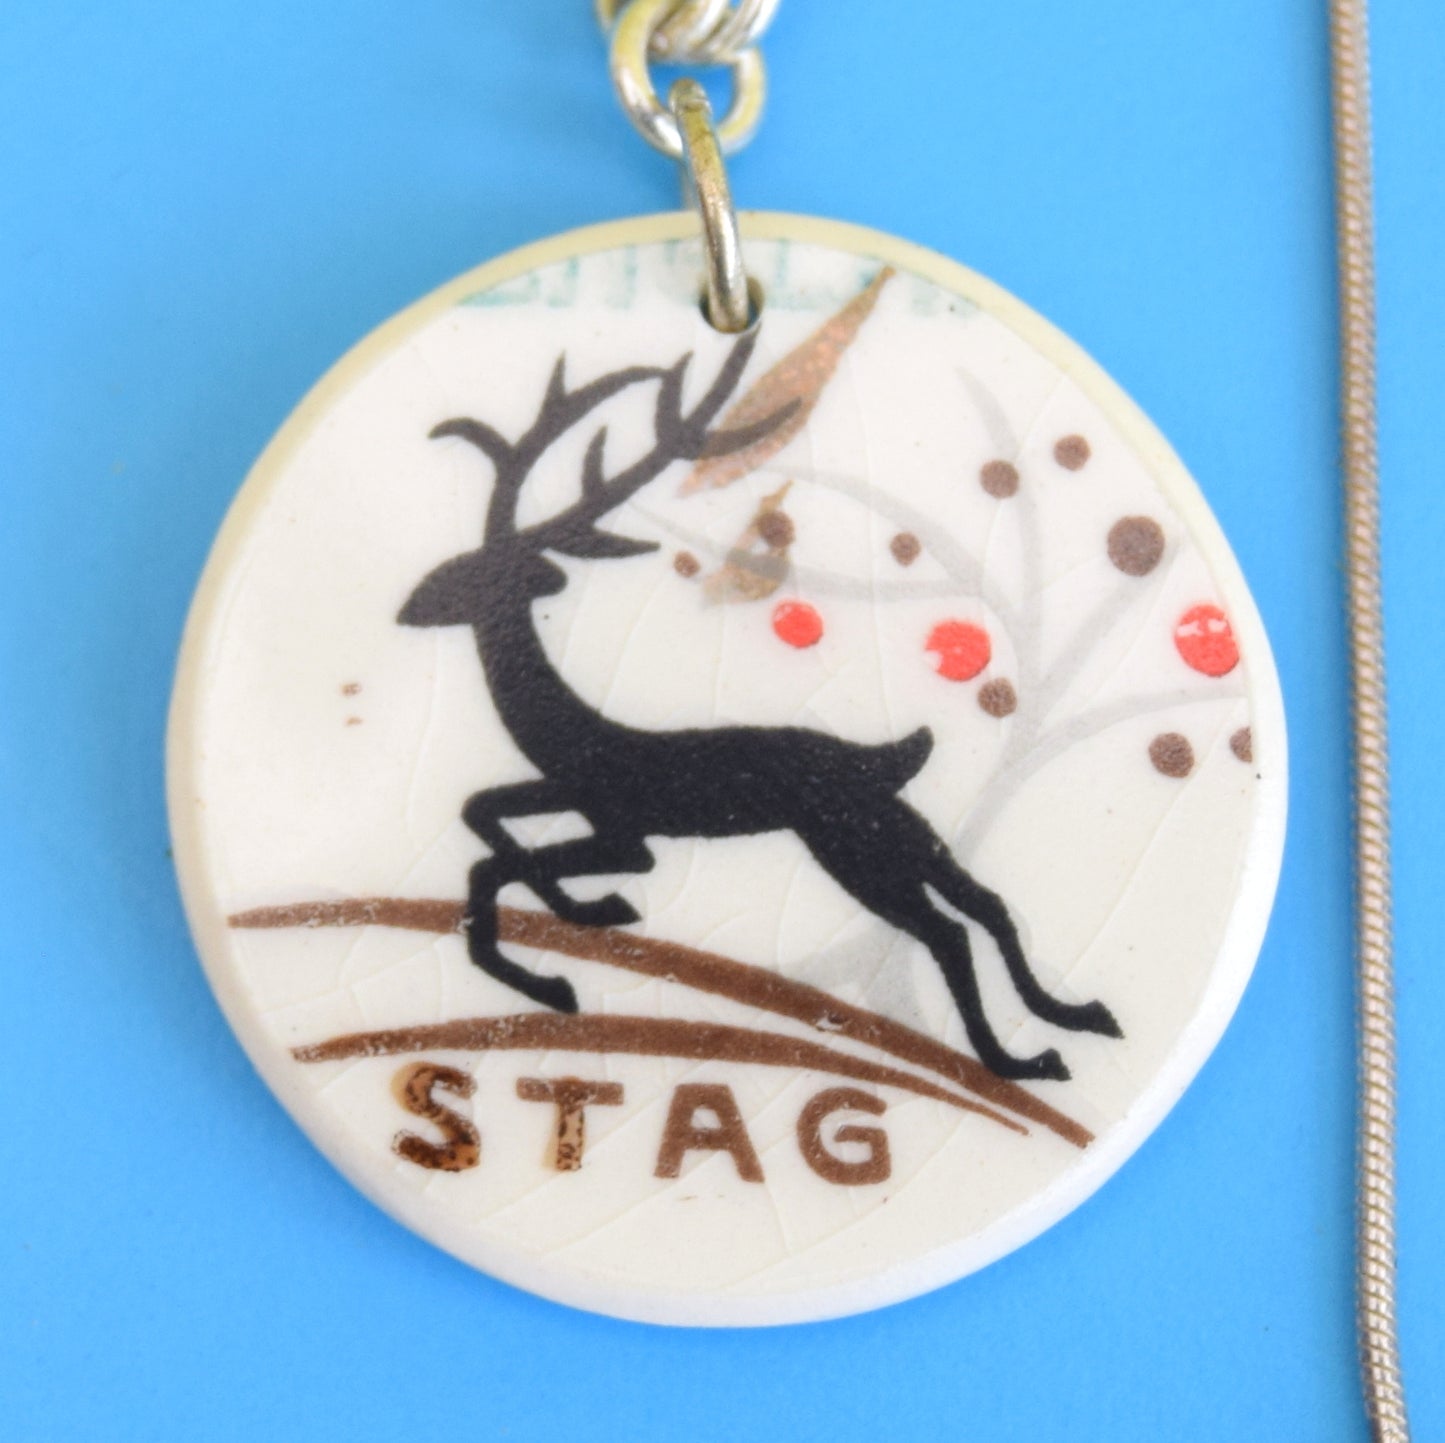 Vintage 1950s Alfred Meakin Shard Necklace / Ring - Stag